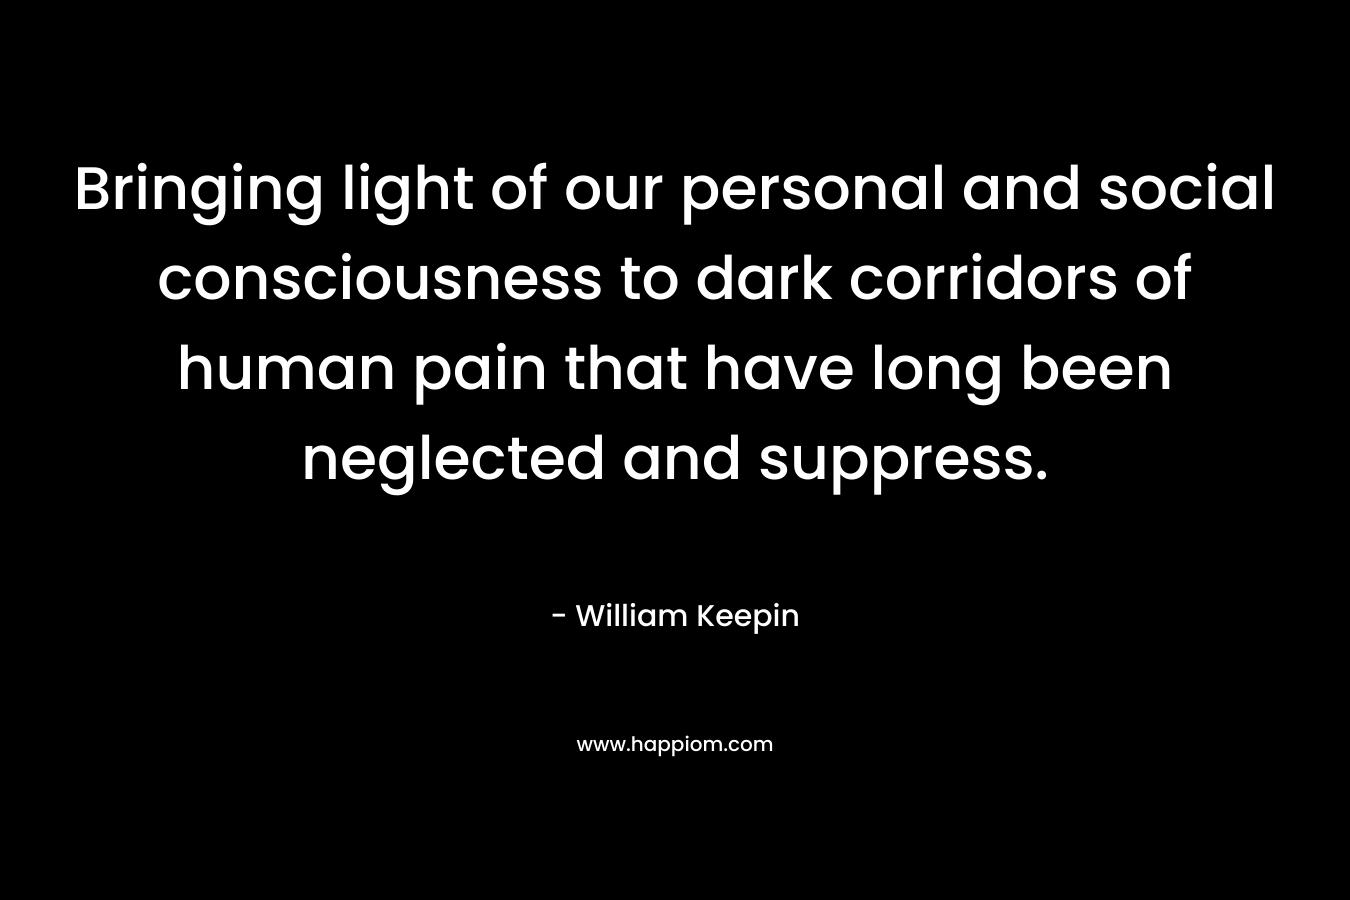 Bringing light of our personal and social consciousness to dark corridors of human pain that have long been neglected and suppress. – William Keepin